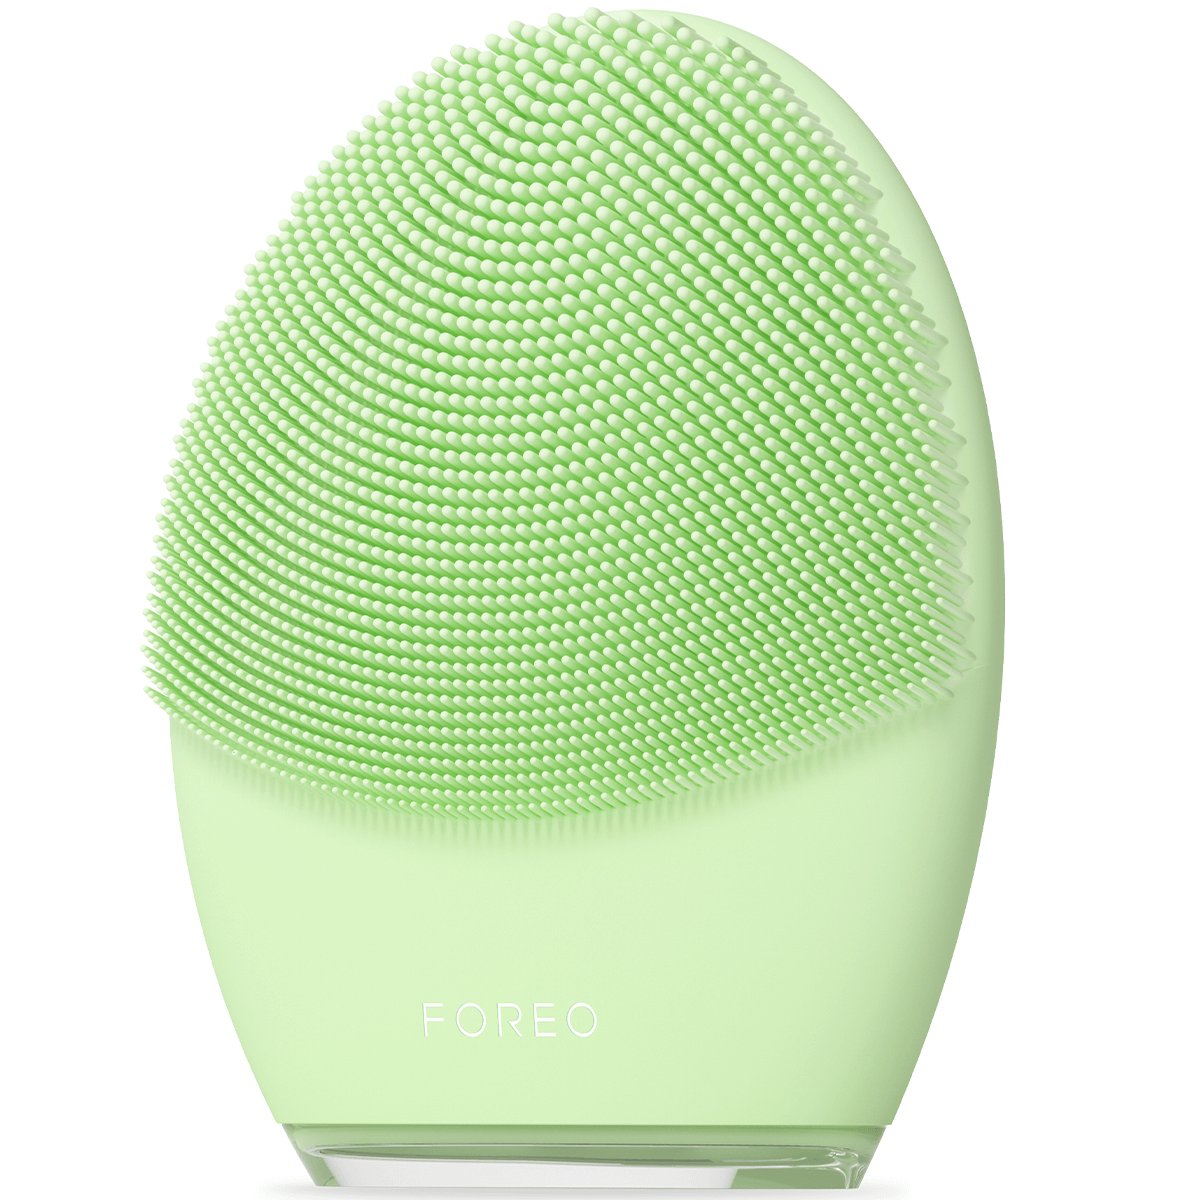 FOREO LUNA 4 Men Smart Facial Cleansing & Firming Device 